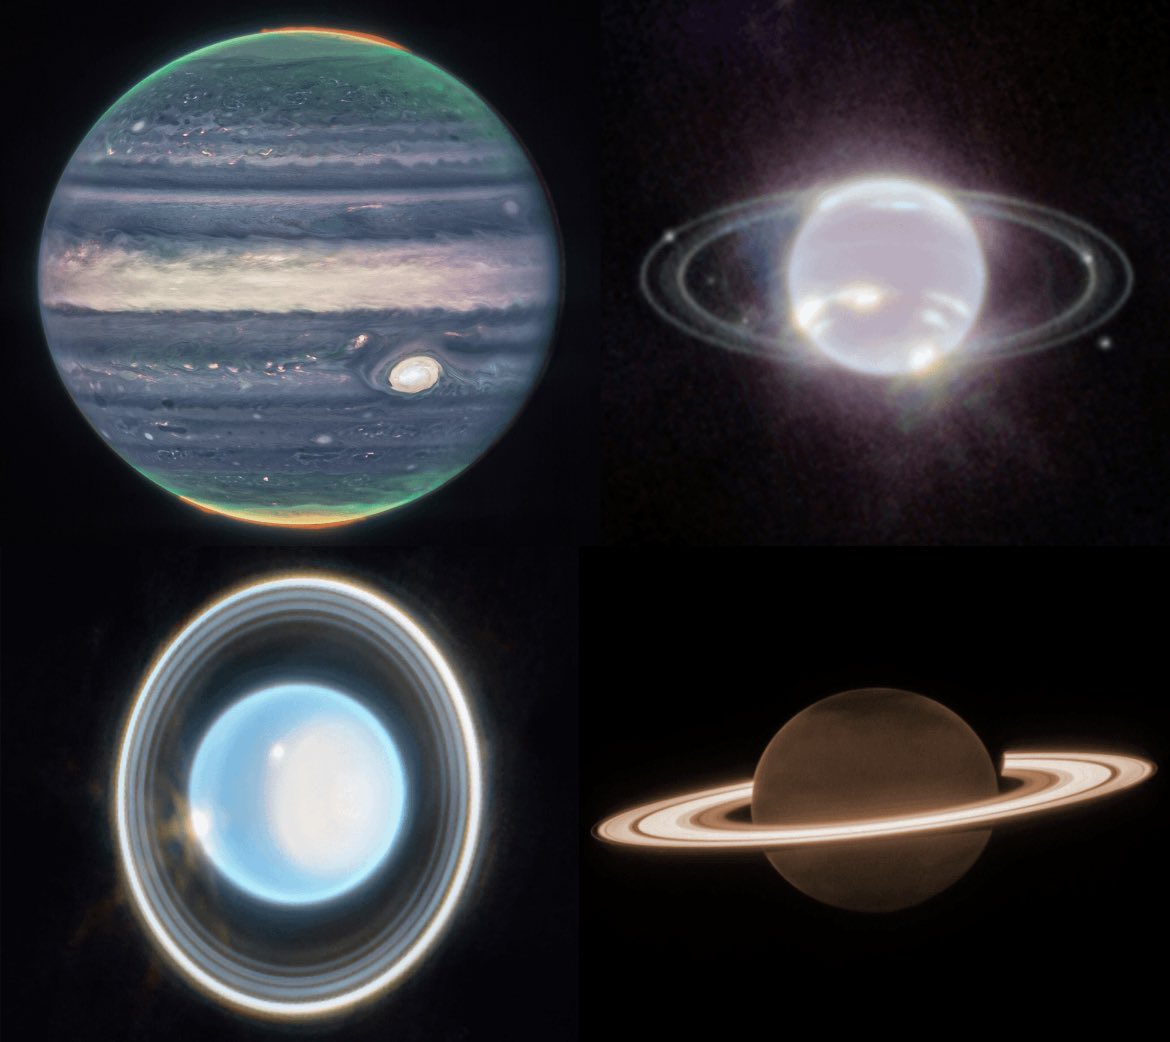 All four gas giants captured by the James Webb Space Telescope